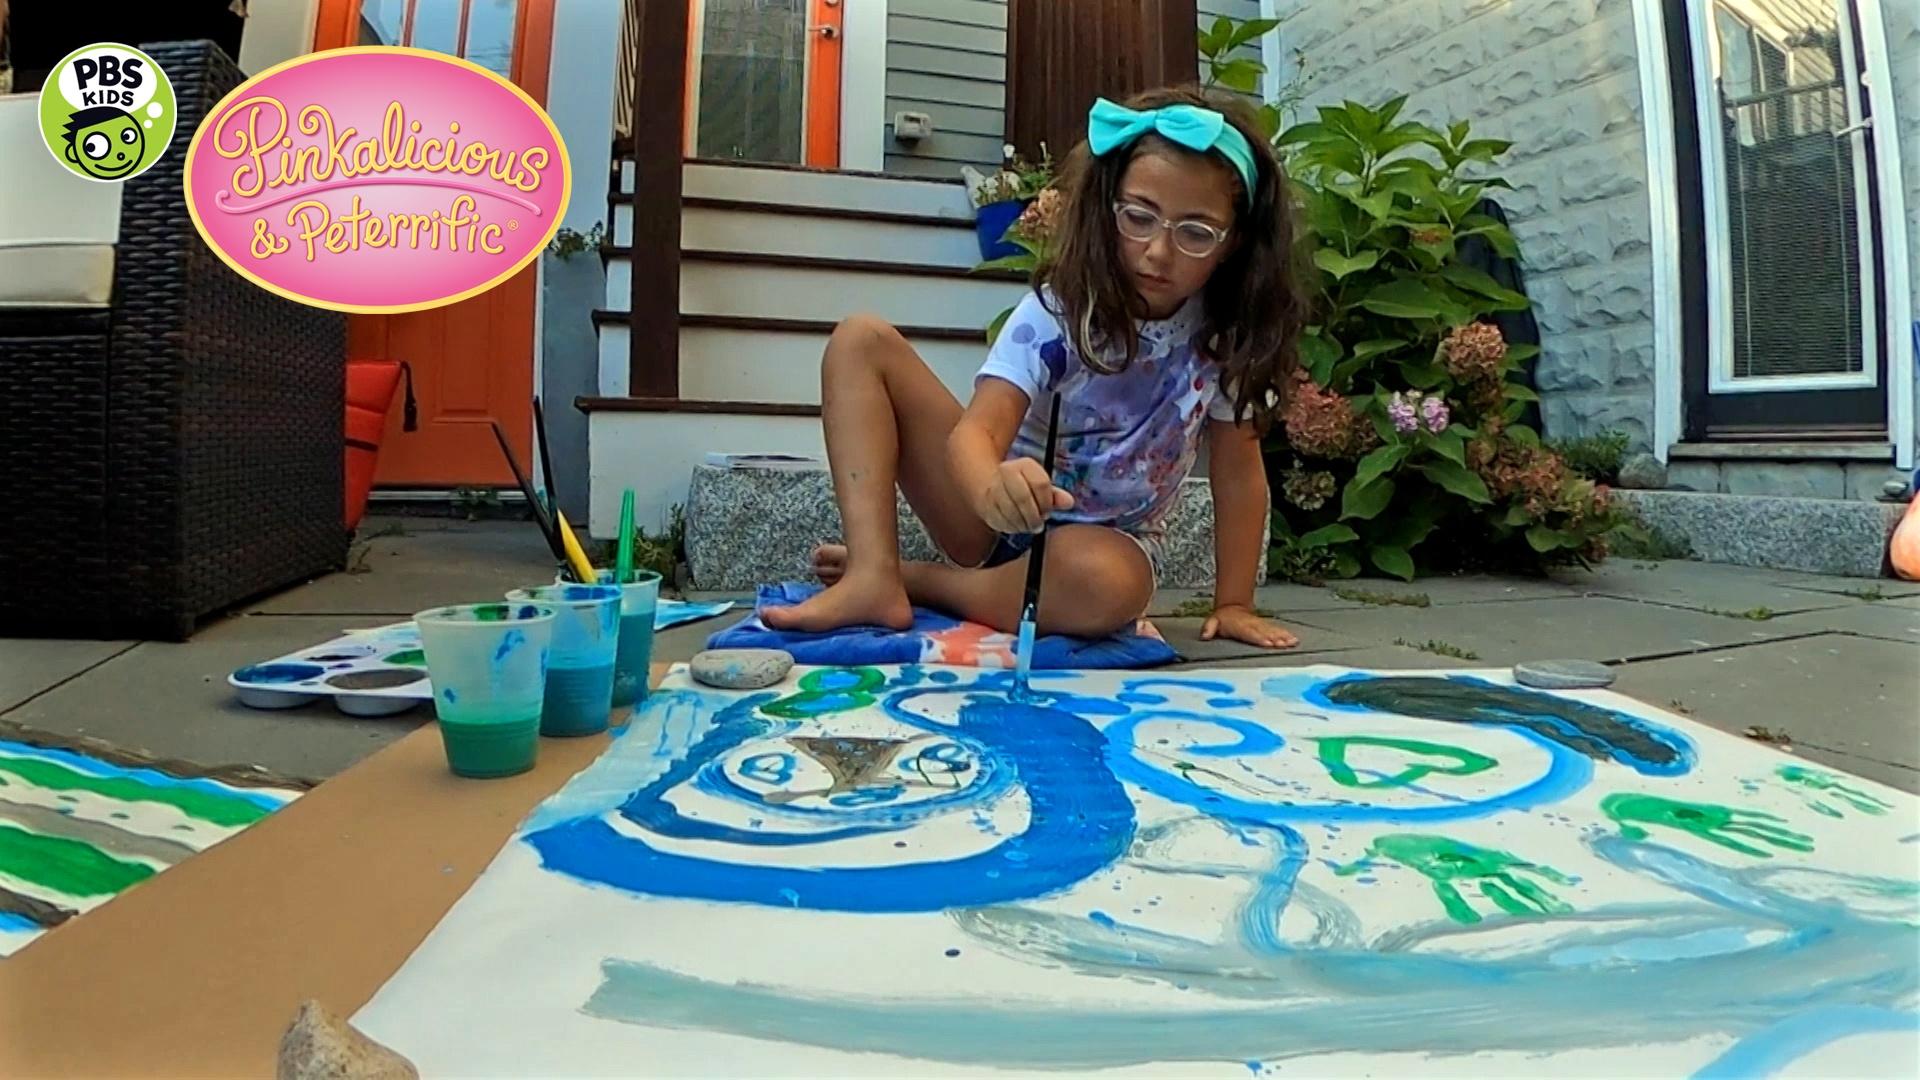 A girl painting on the ground.